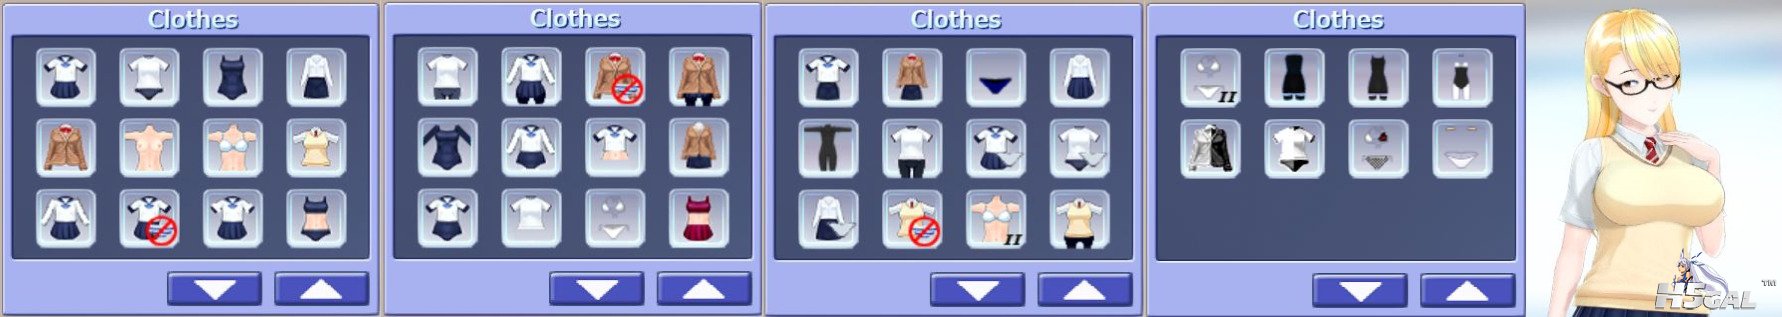 [AA2][Clothing][HEXA Collection][EX][v2.2.2][Various]4.jpg